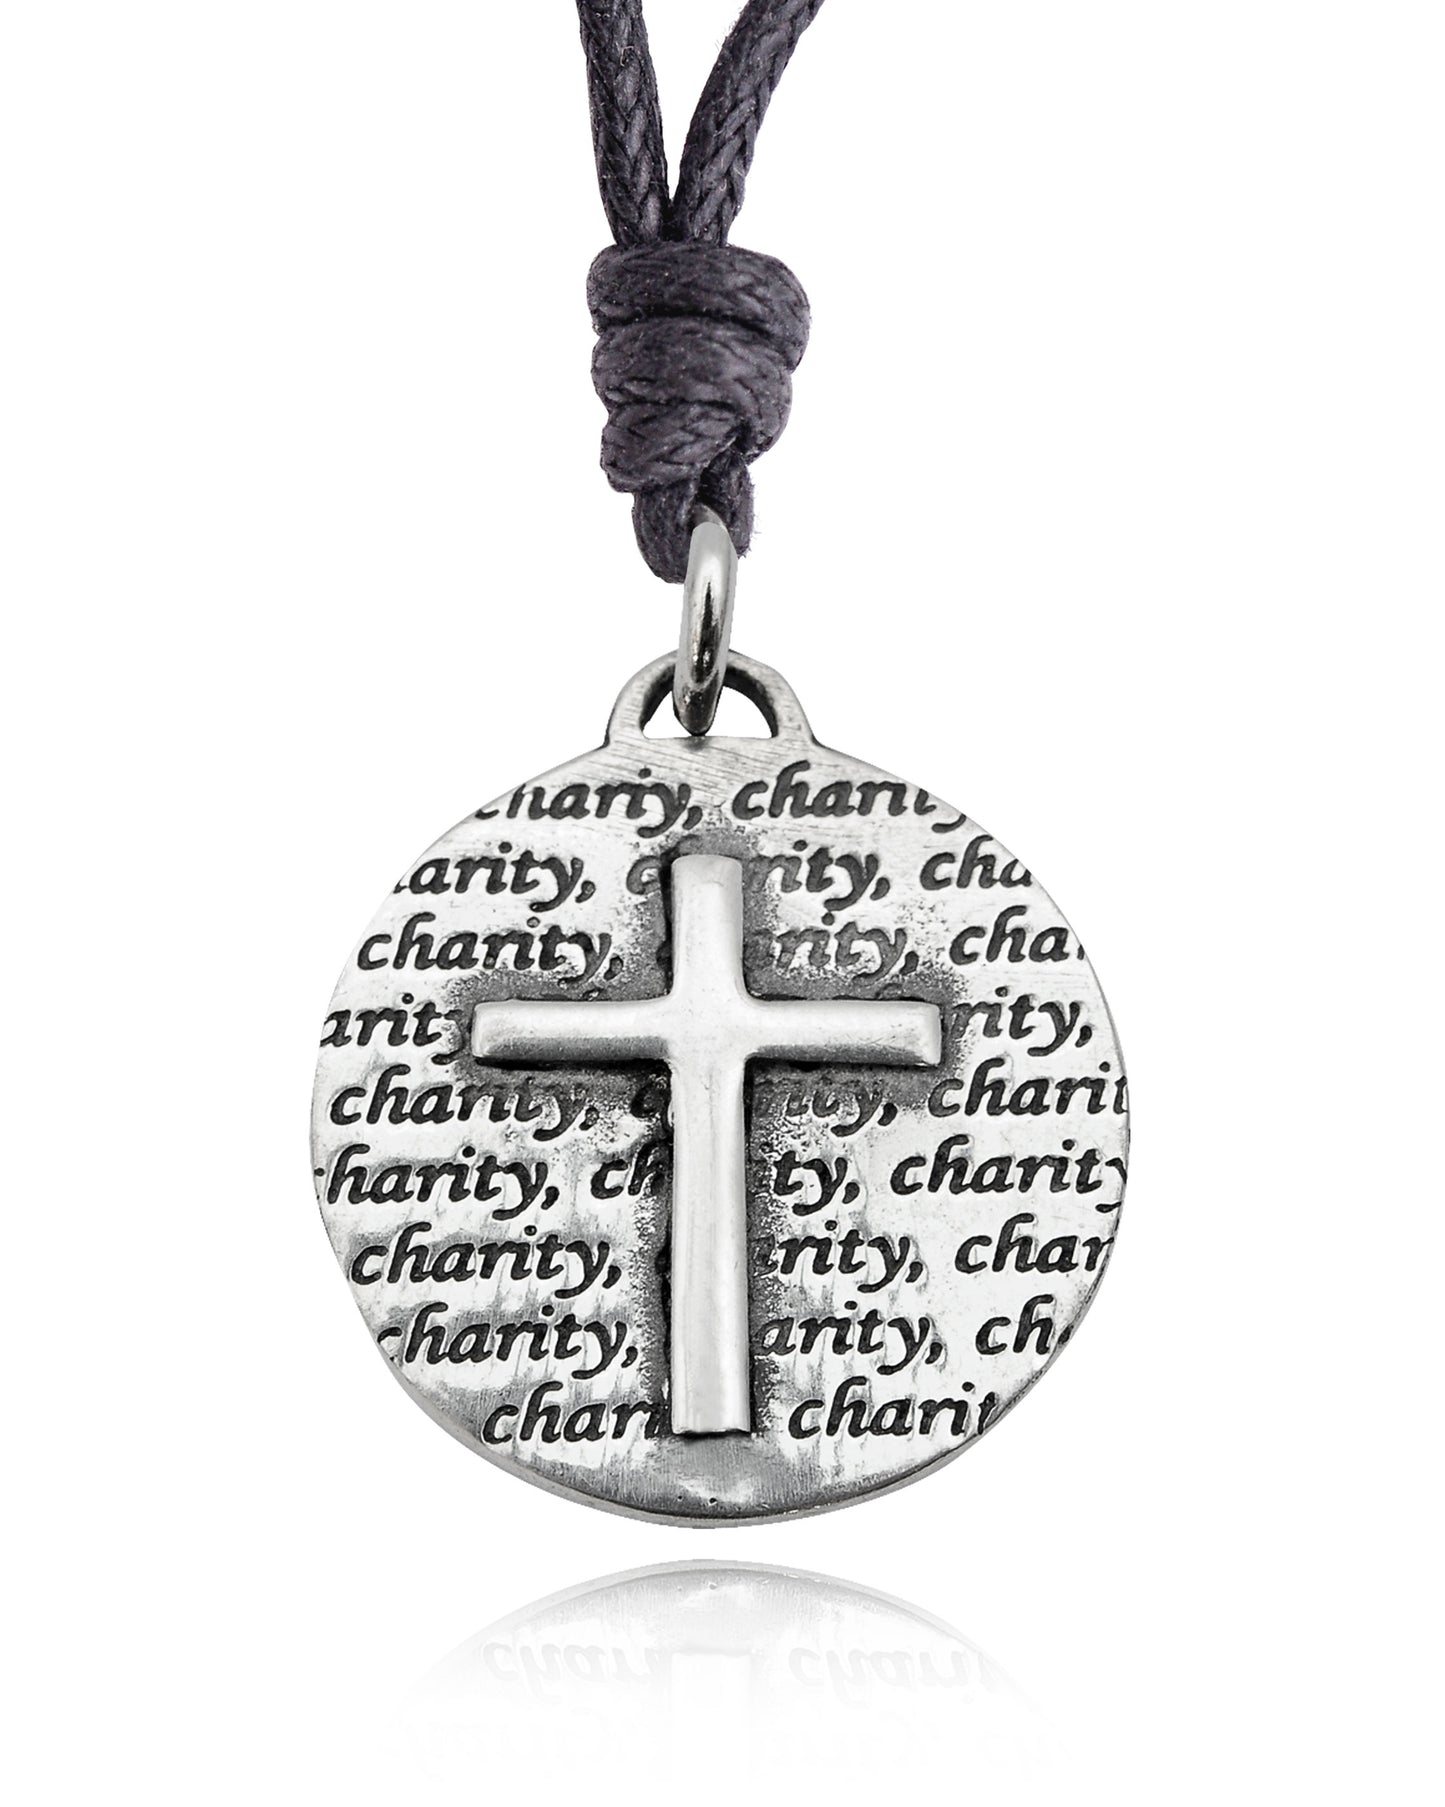 New Christian Cross Charity Silver Pewter Charm Necklace Pendant Jewelry